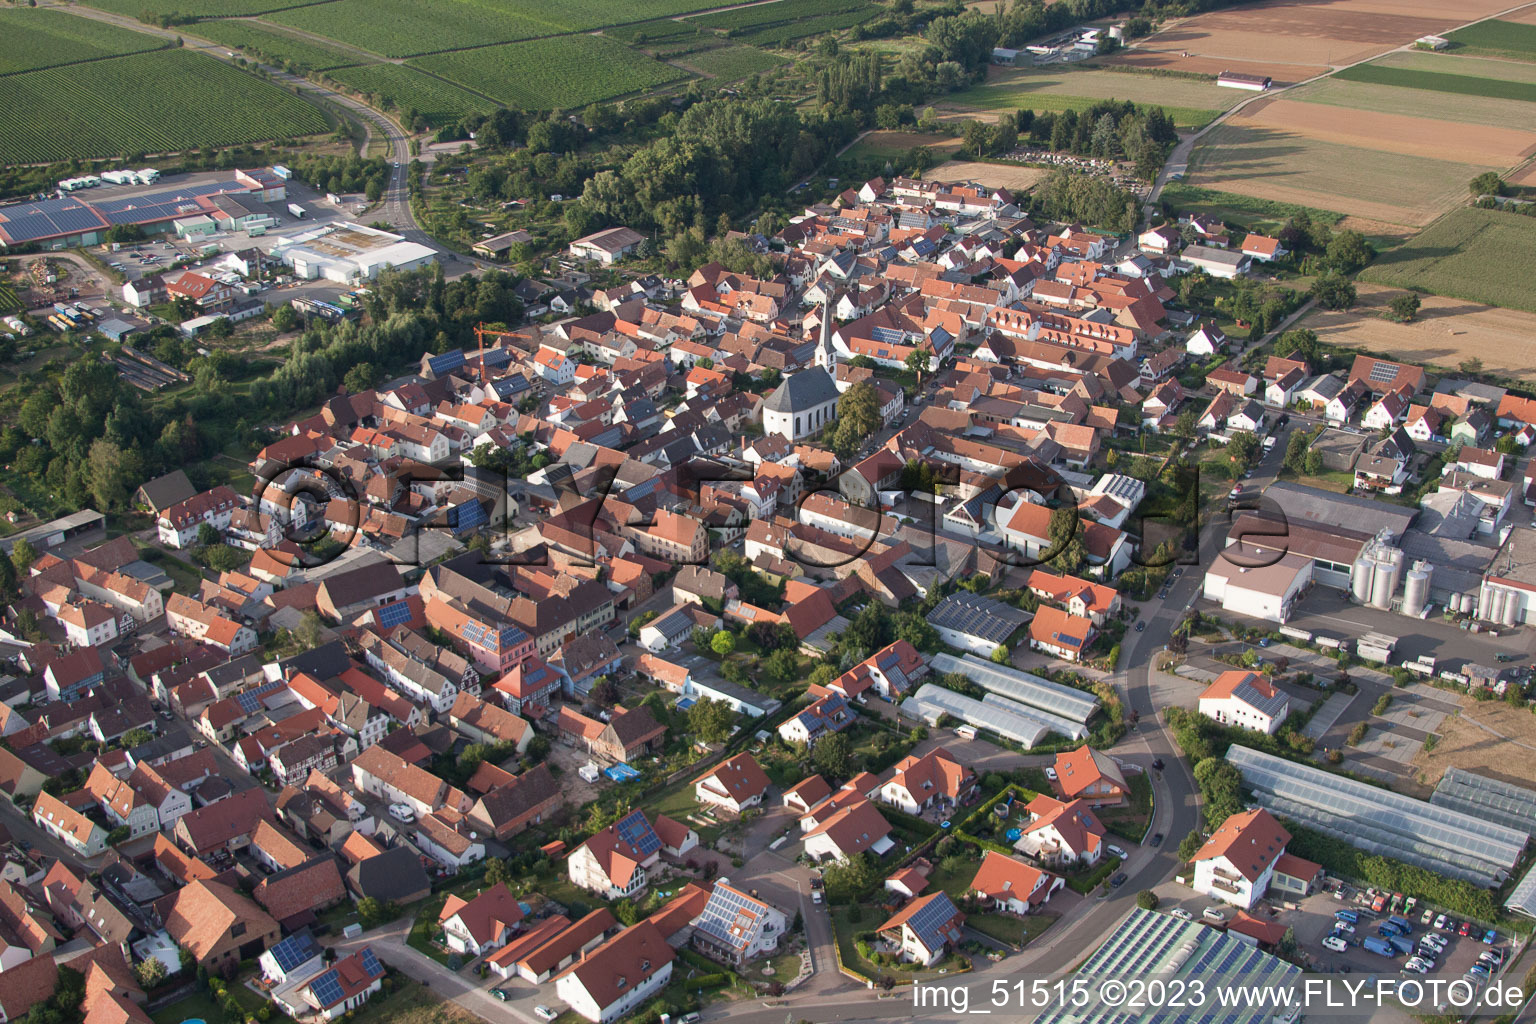 Drone image of Hochstadt in the state Rhineland-Palatinate, Germany